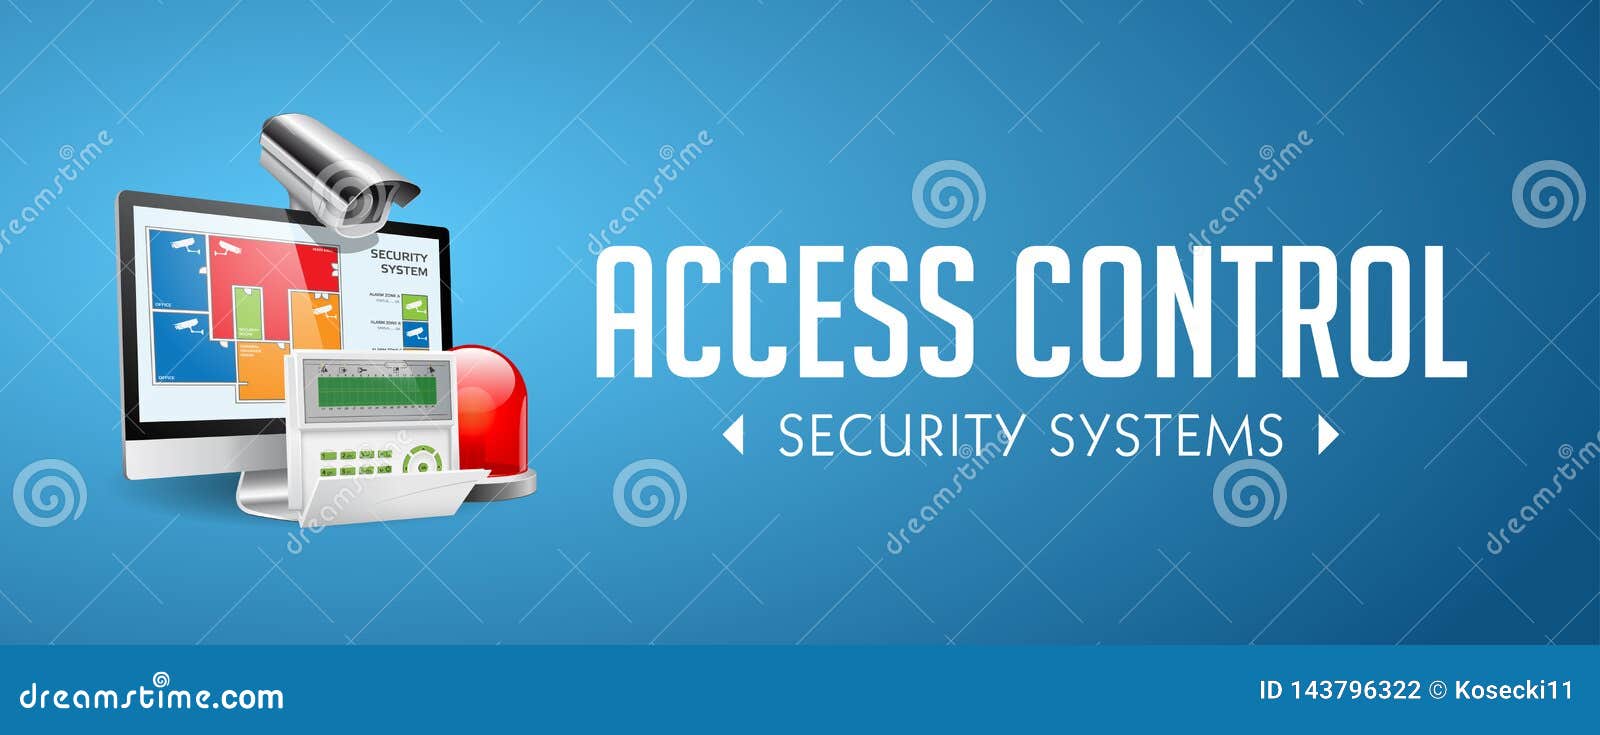 access control system - alarm zones - security system concept - website banner